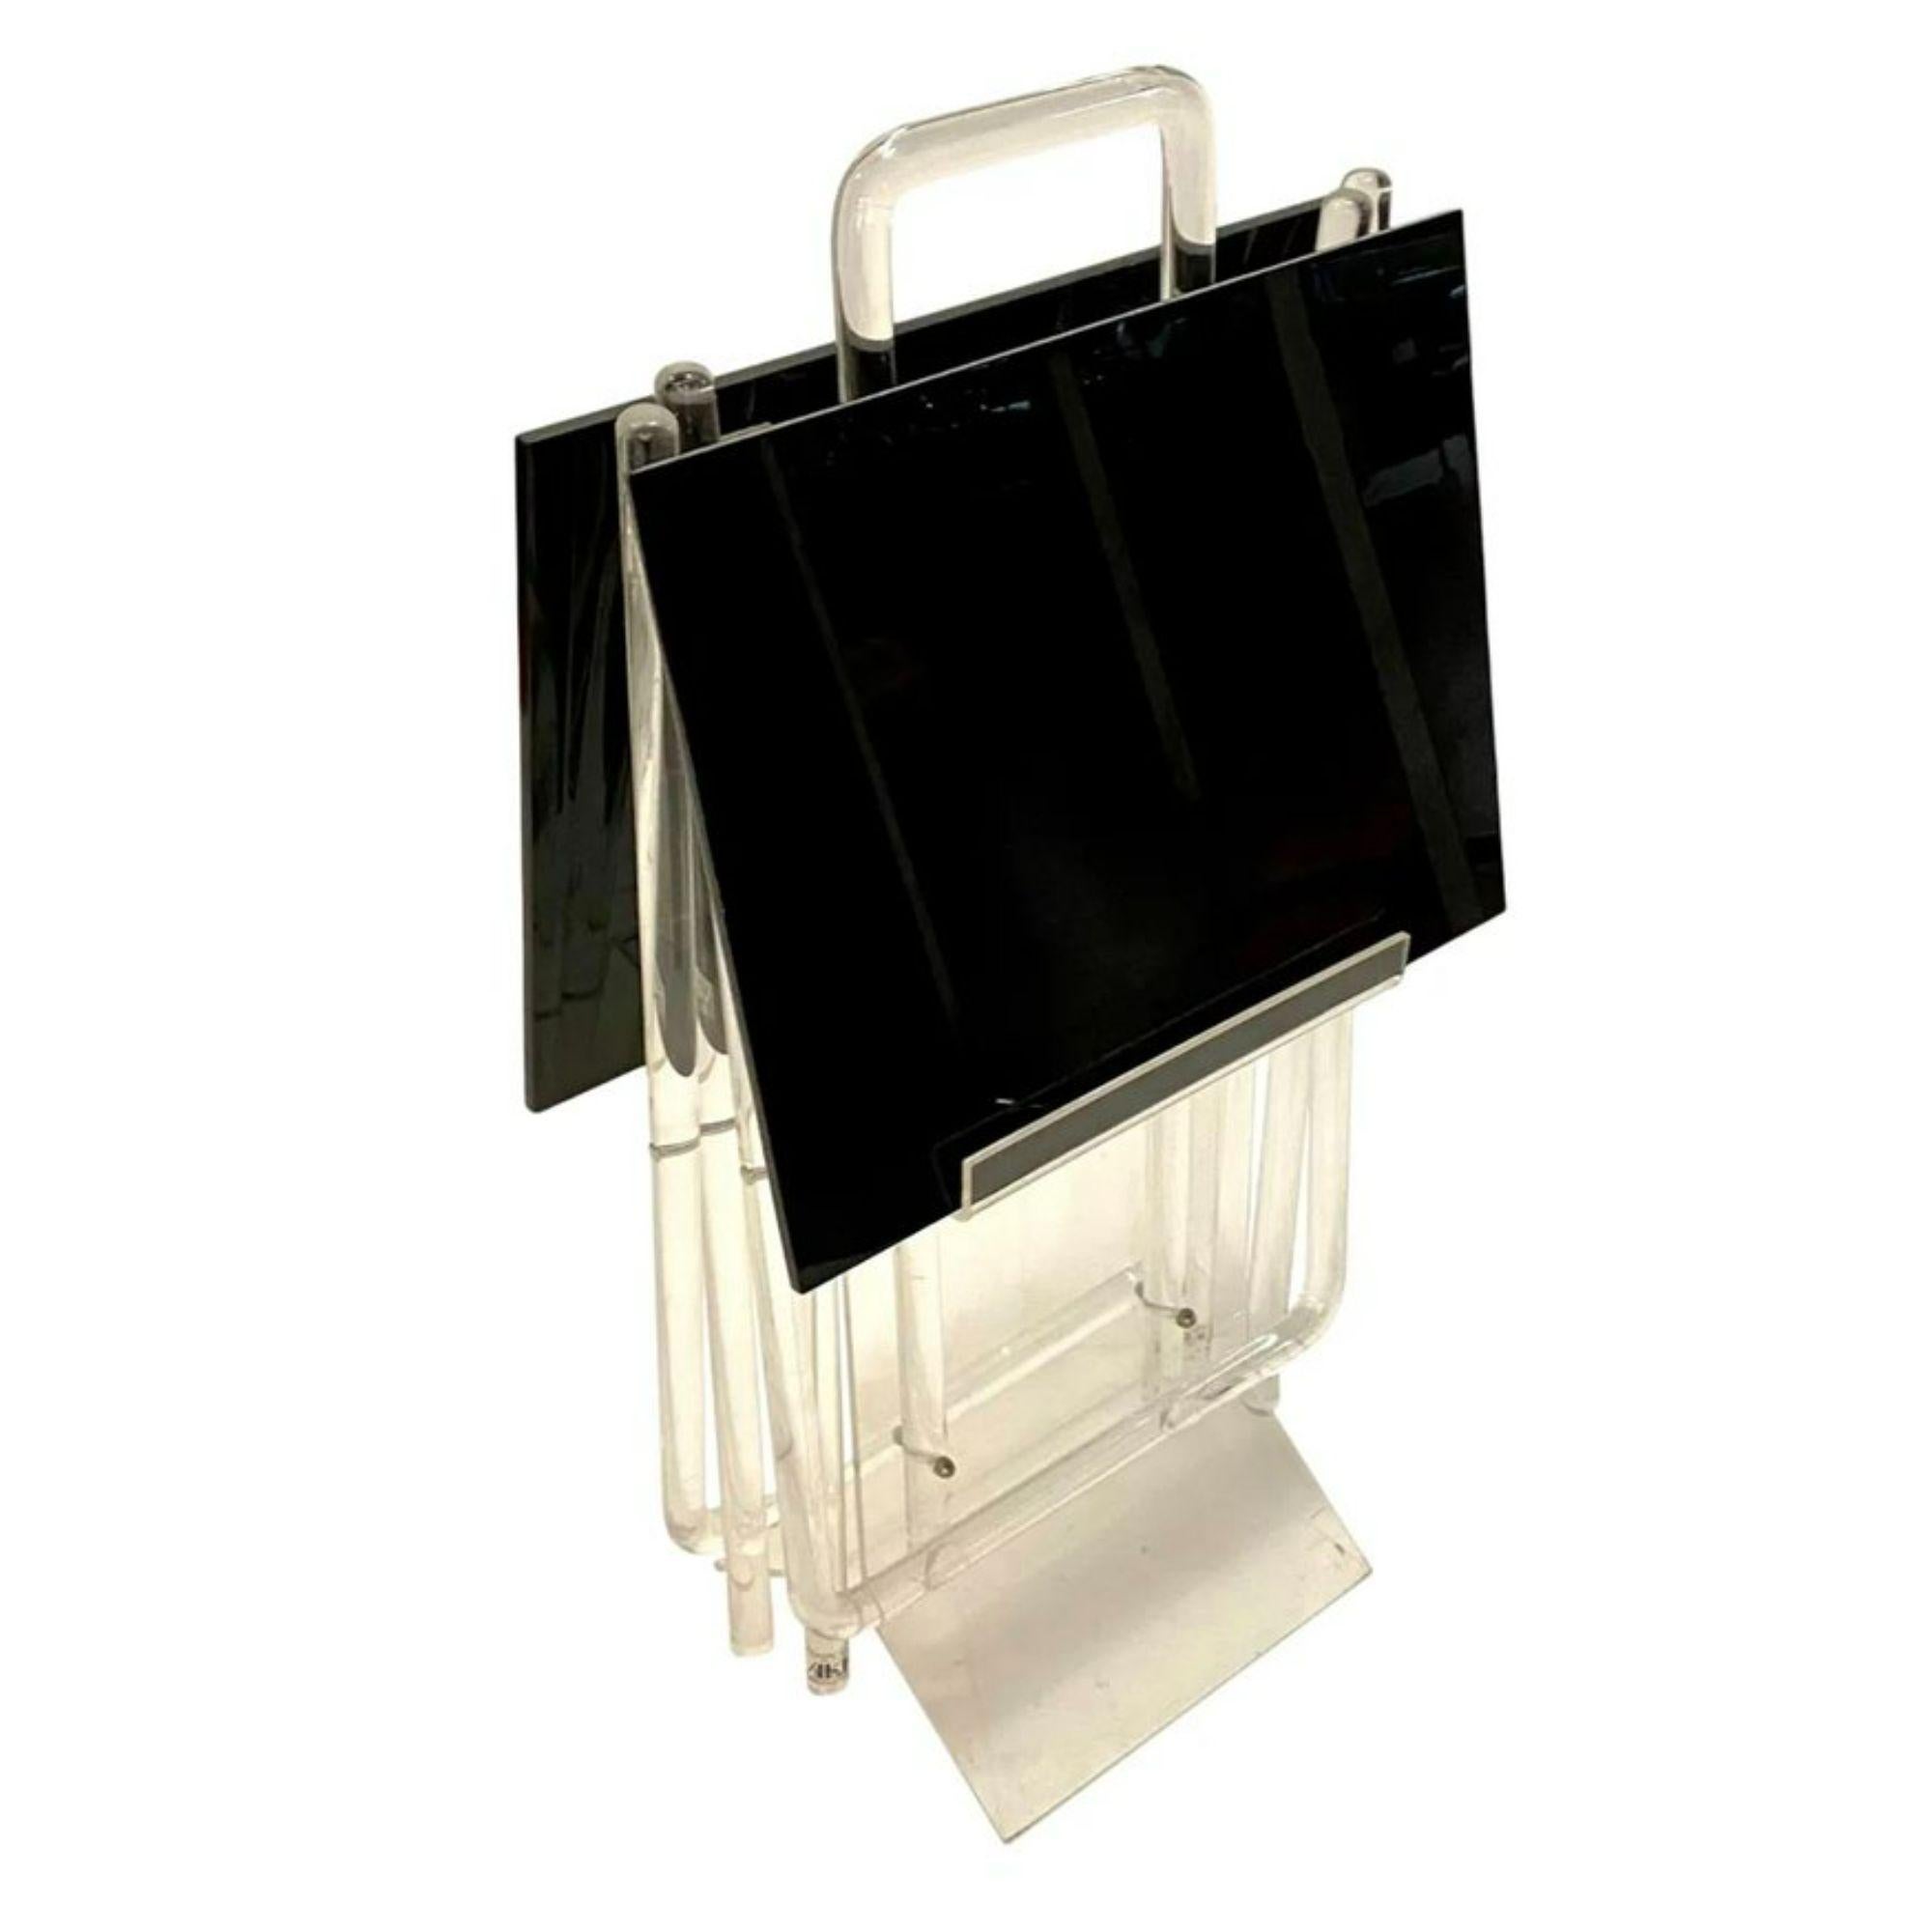 Vintage modern black Lucite tray tables on an clear acrylic stands and carrying caddy, labelled AKKO Classic Ellegance in Acrylic.

Additional Information:
Materials: Acrylic, Lucite
Color: Black
Style: Mid-Century Modern, Modern
Style After: